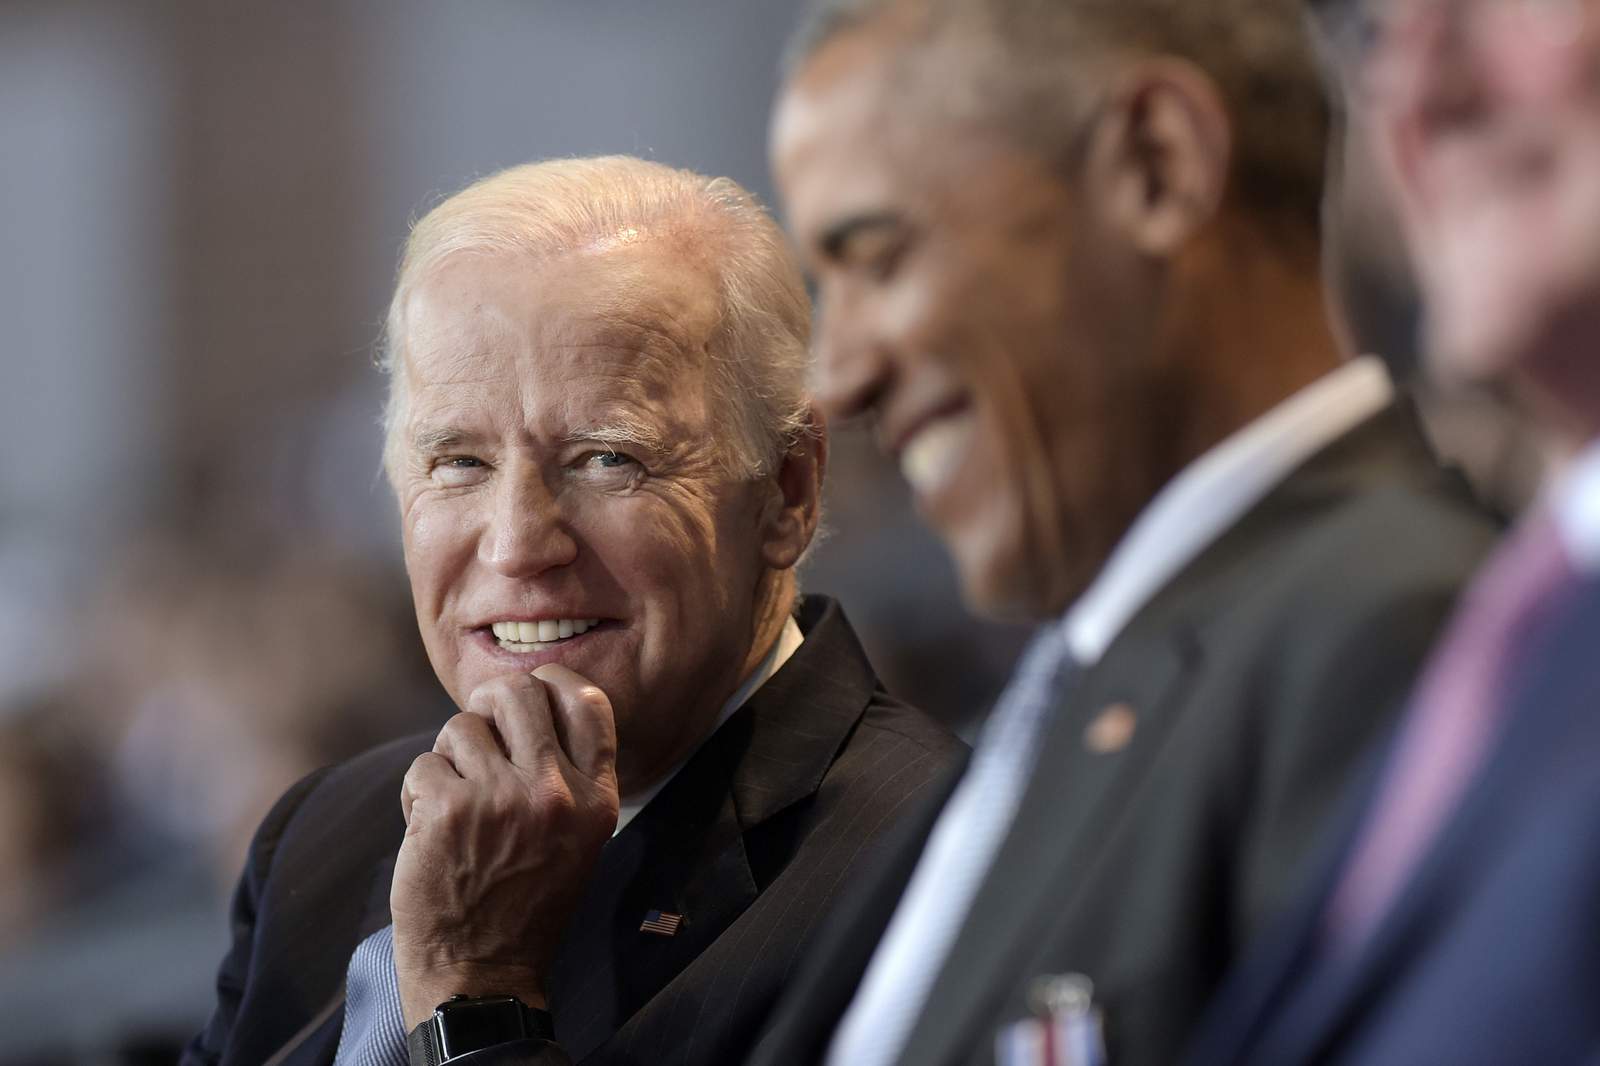 WHAT TO WATCH: Biden agenda and reviving Obama enthusiasm